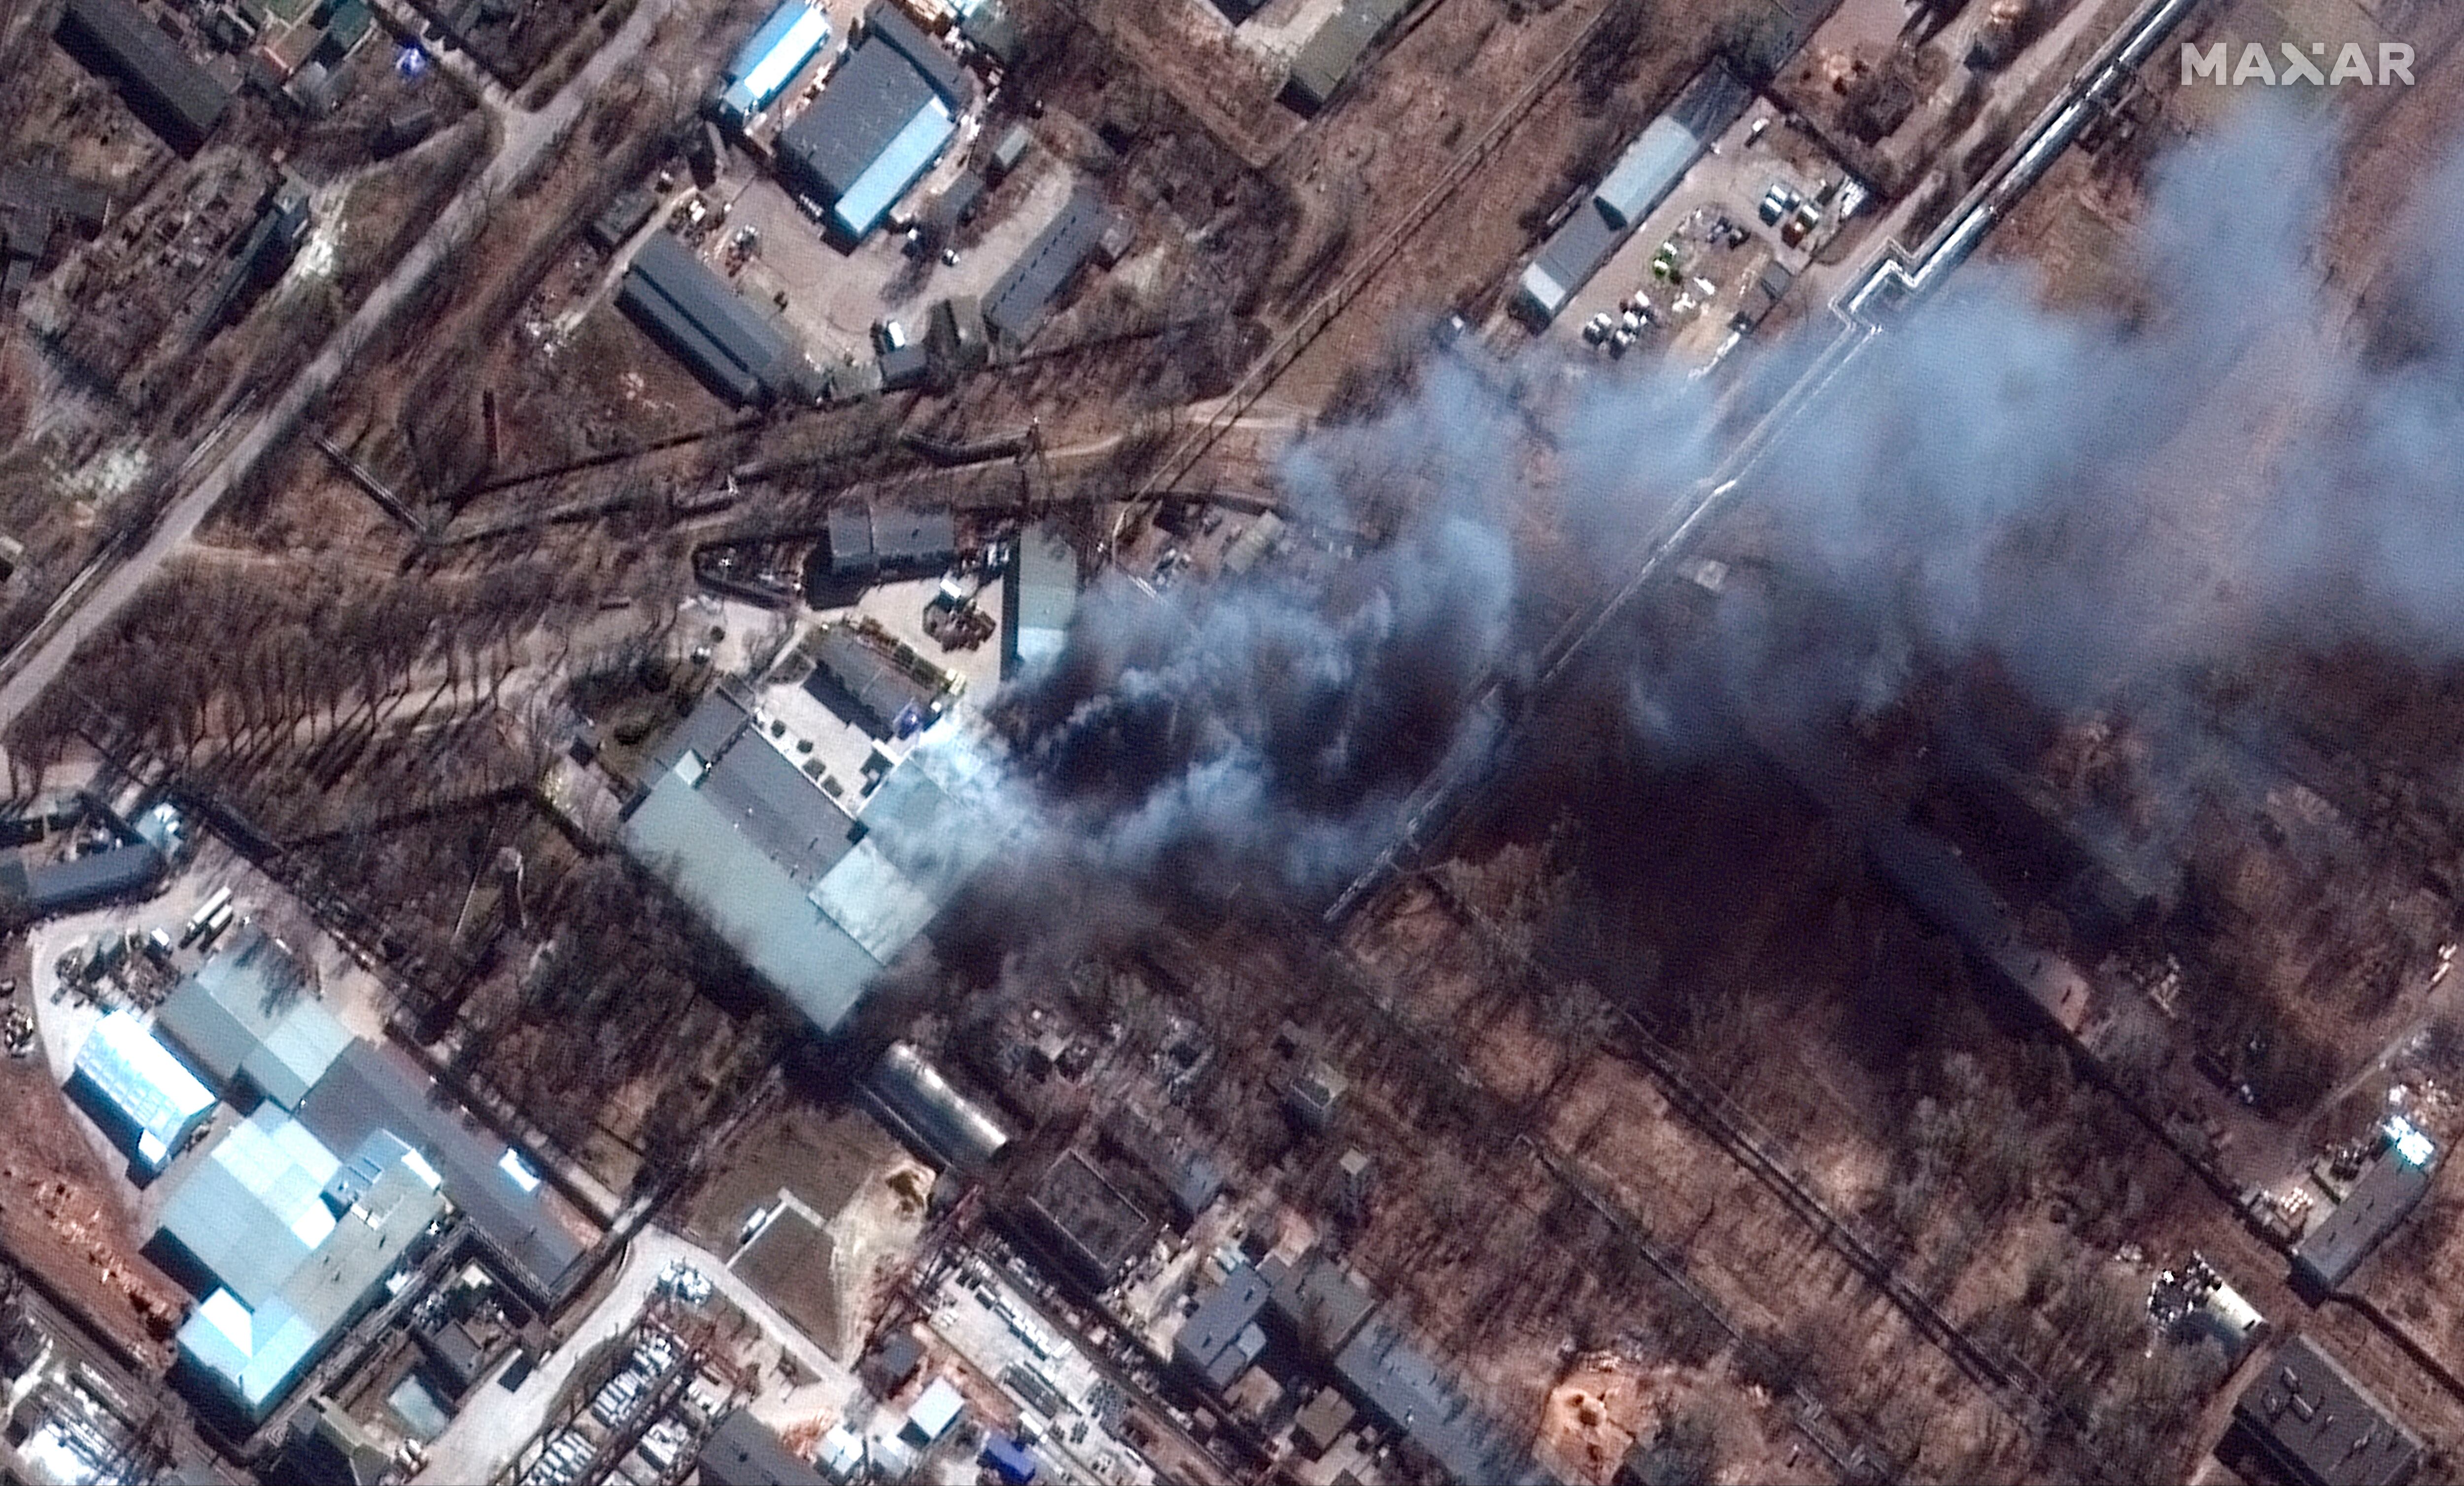 Fires burn in an industrial area and nearby fields south of Chernihiv, Ukraine, during the Russian invasion, Thursday, March 10, 2022. (Satellite image ©2022 Maxar Technologies via AP)